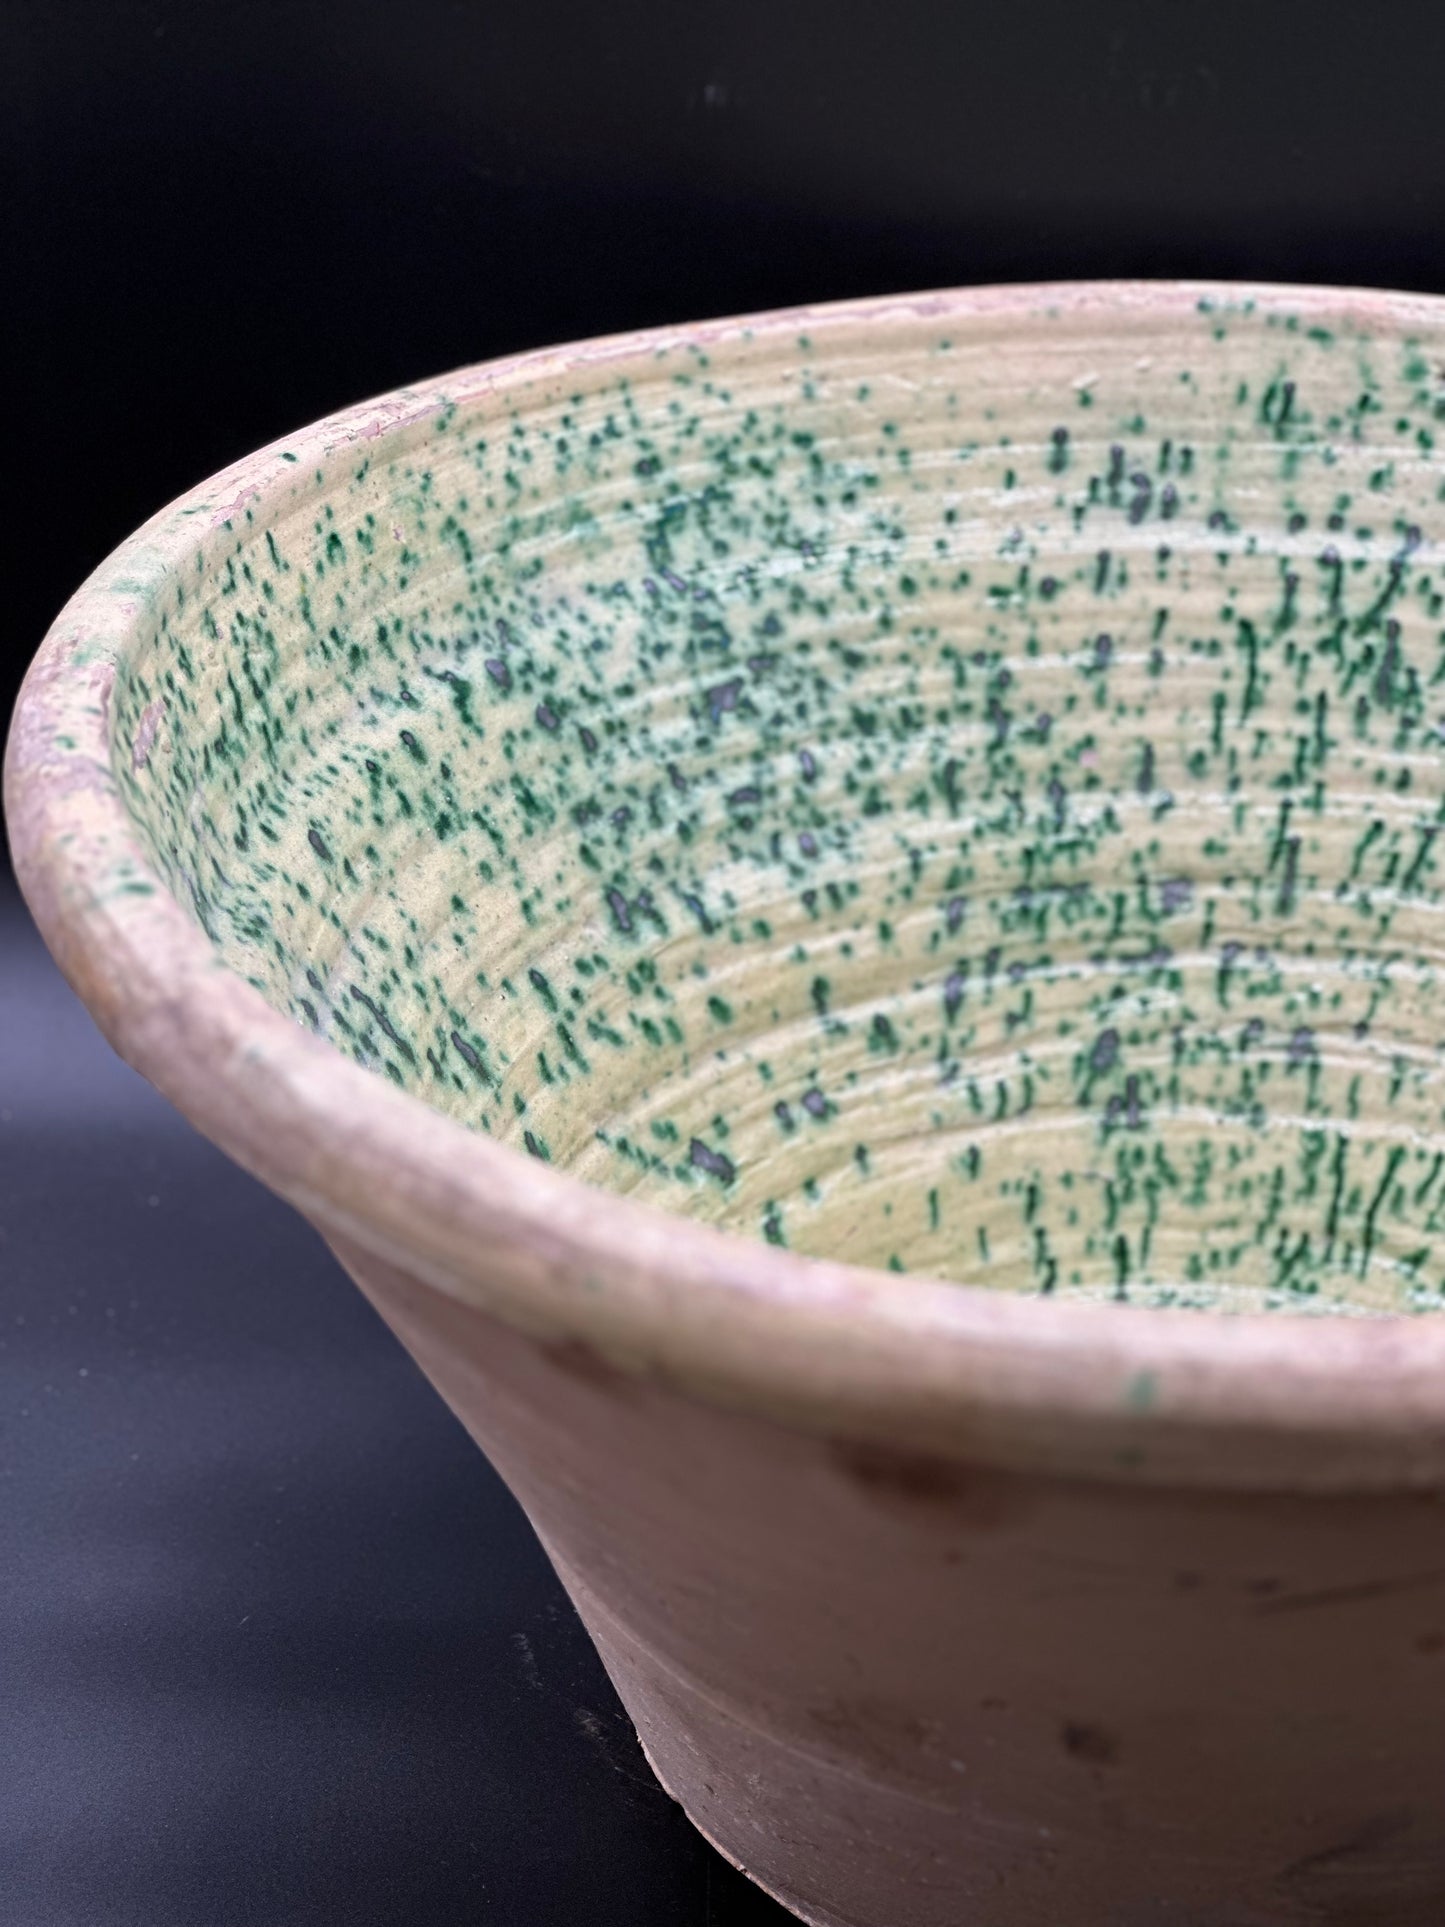 Provencal Spinach-Glaze Olive Bowl  - 19th Century